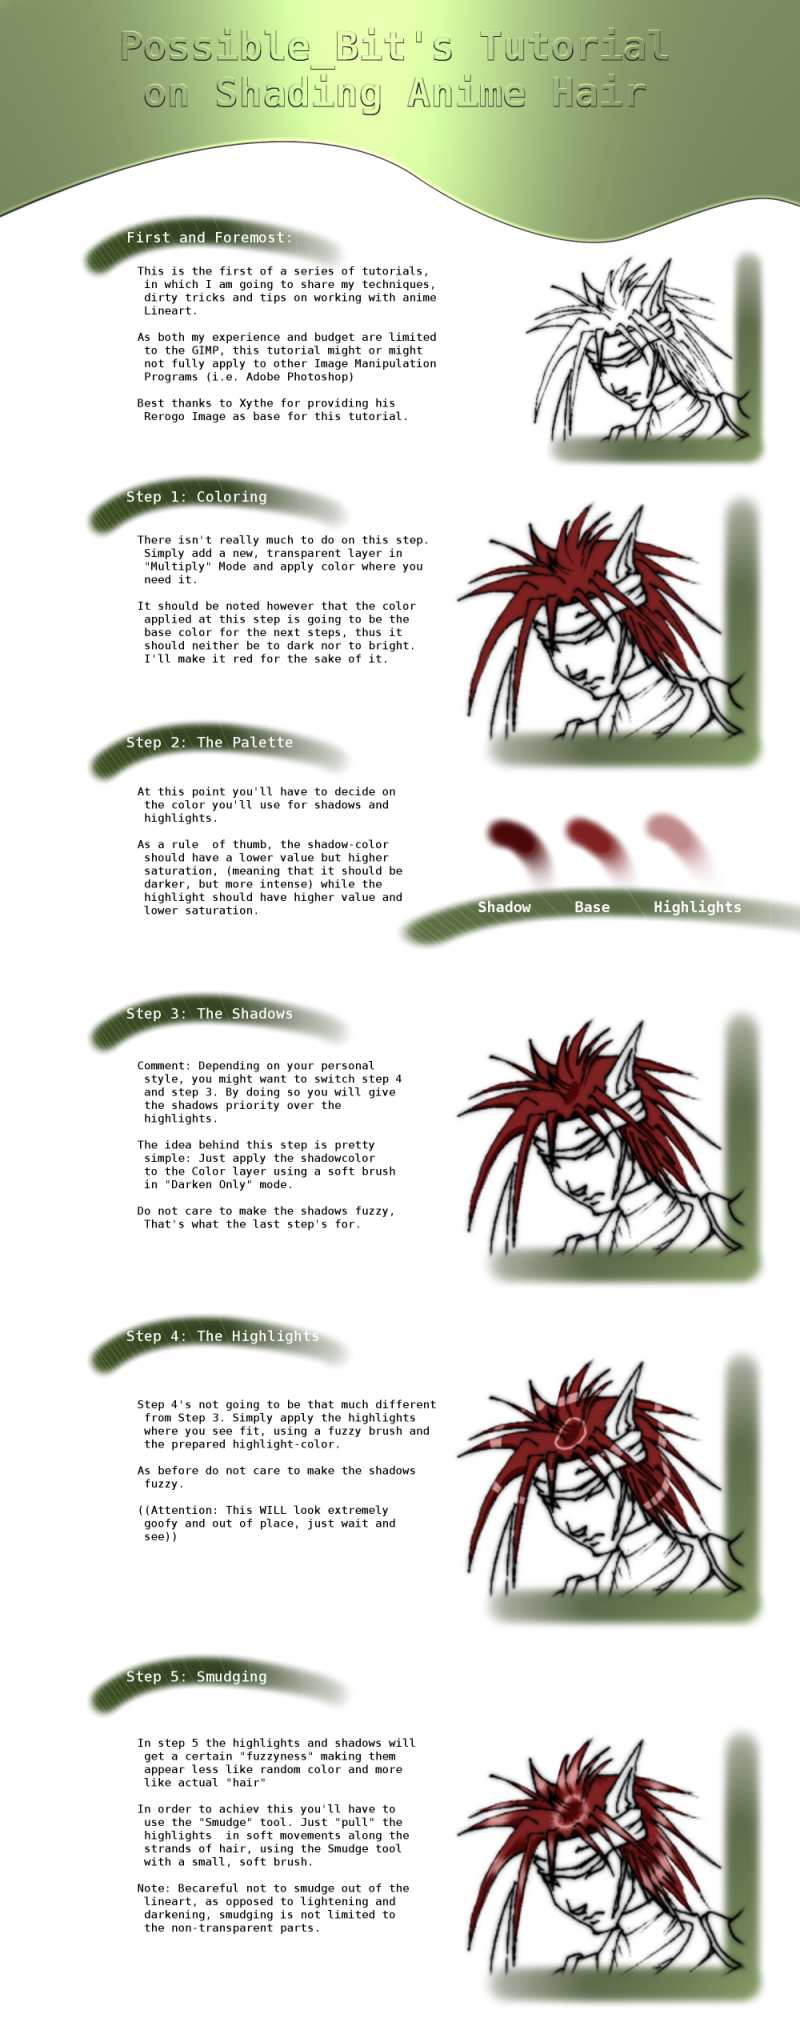 Anime-Hair Shading Tutorial by PossibleBit on deviantART